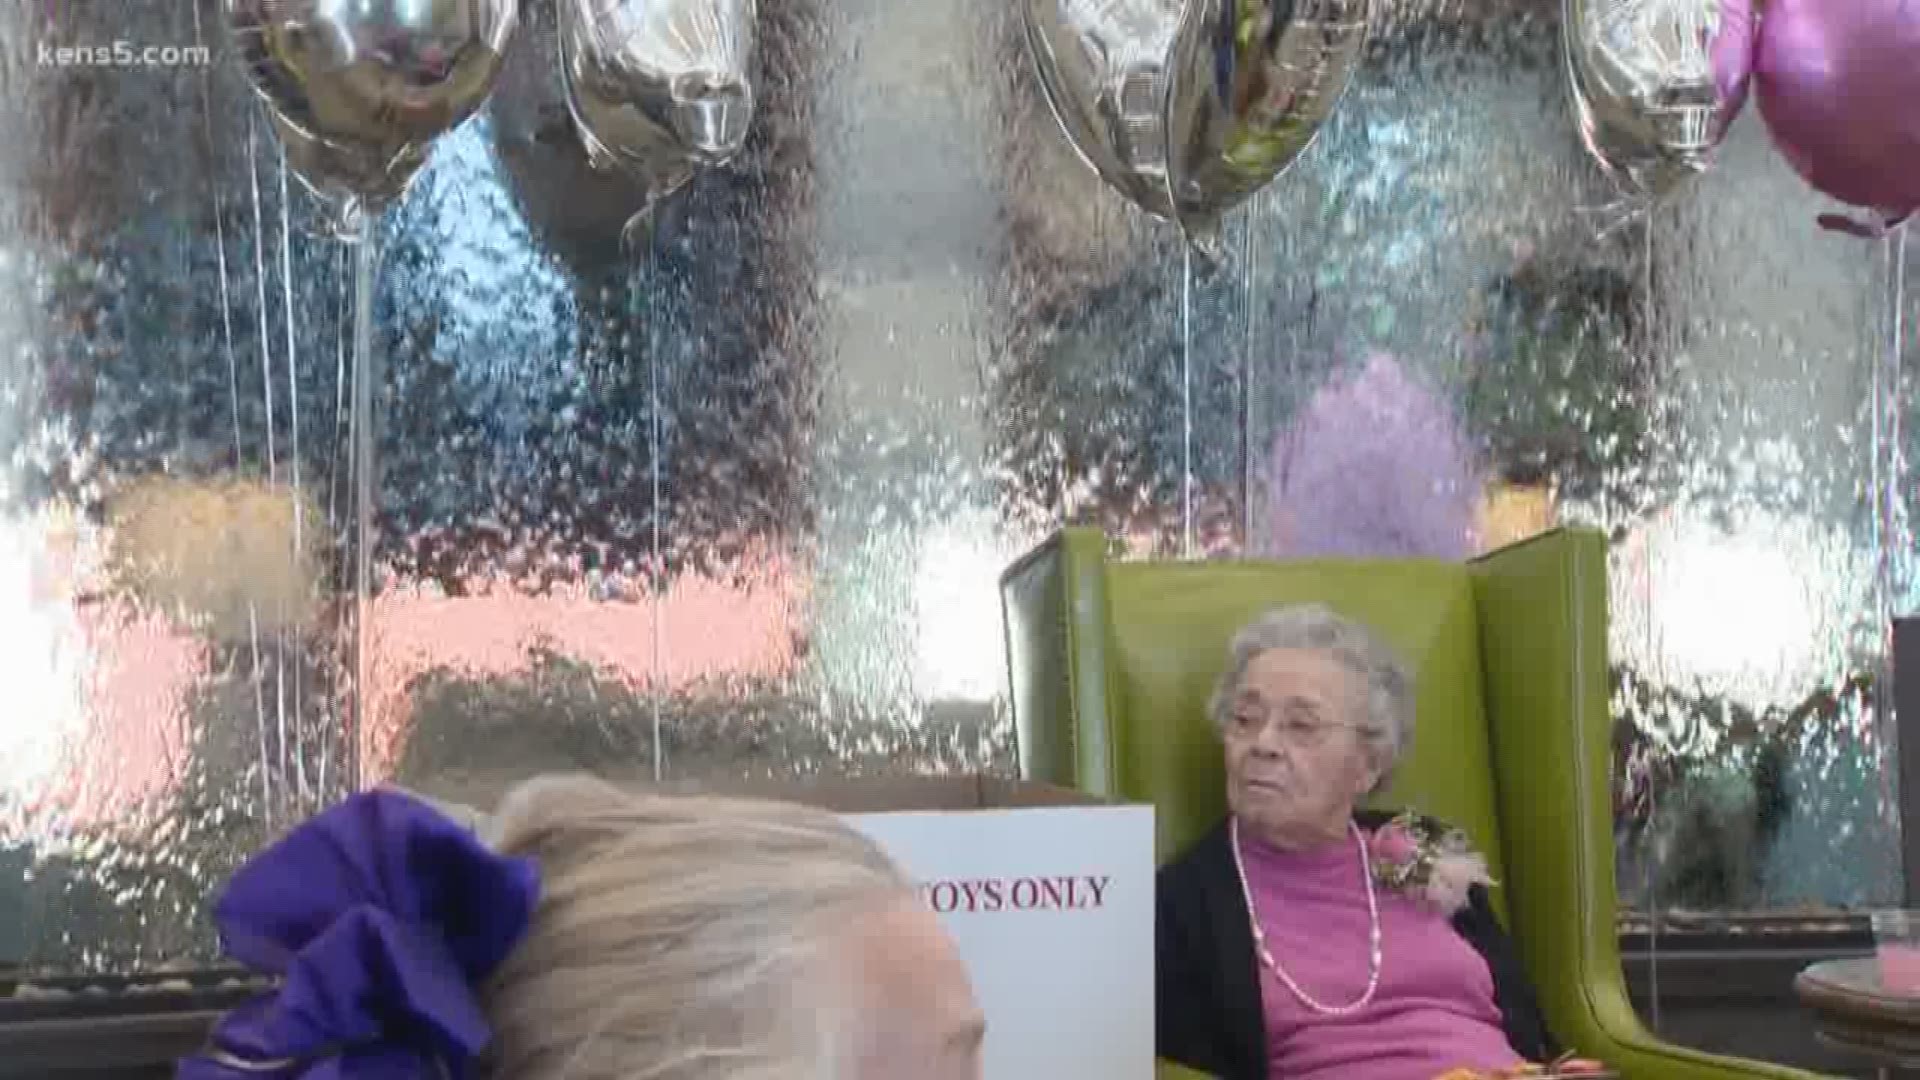 A local woman reached a huge milestone with her 101st birthday, but instead of accepting gifts for herself, she asked that toys be brought for charity.